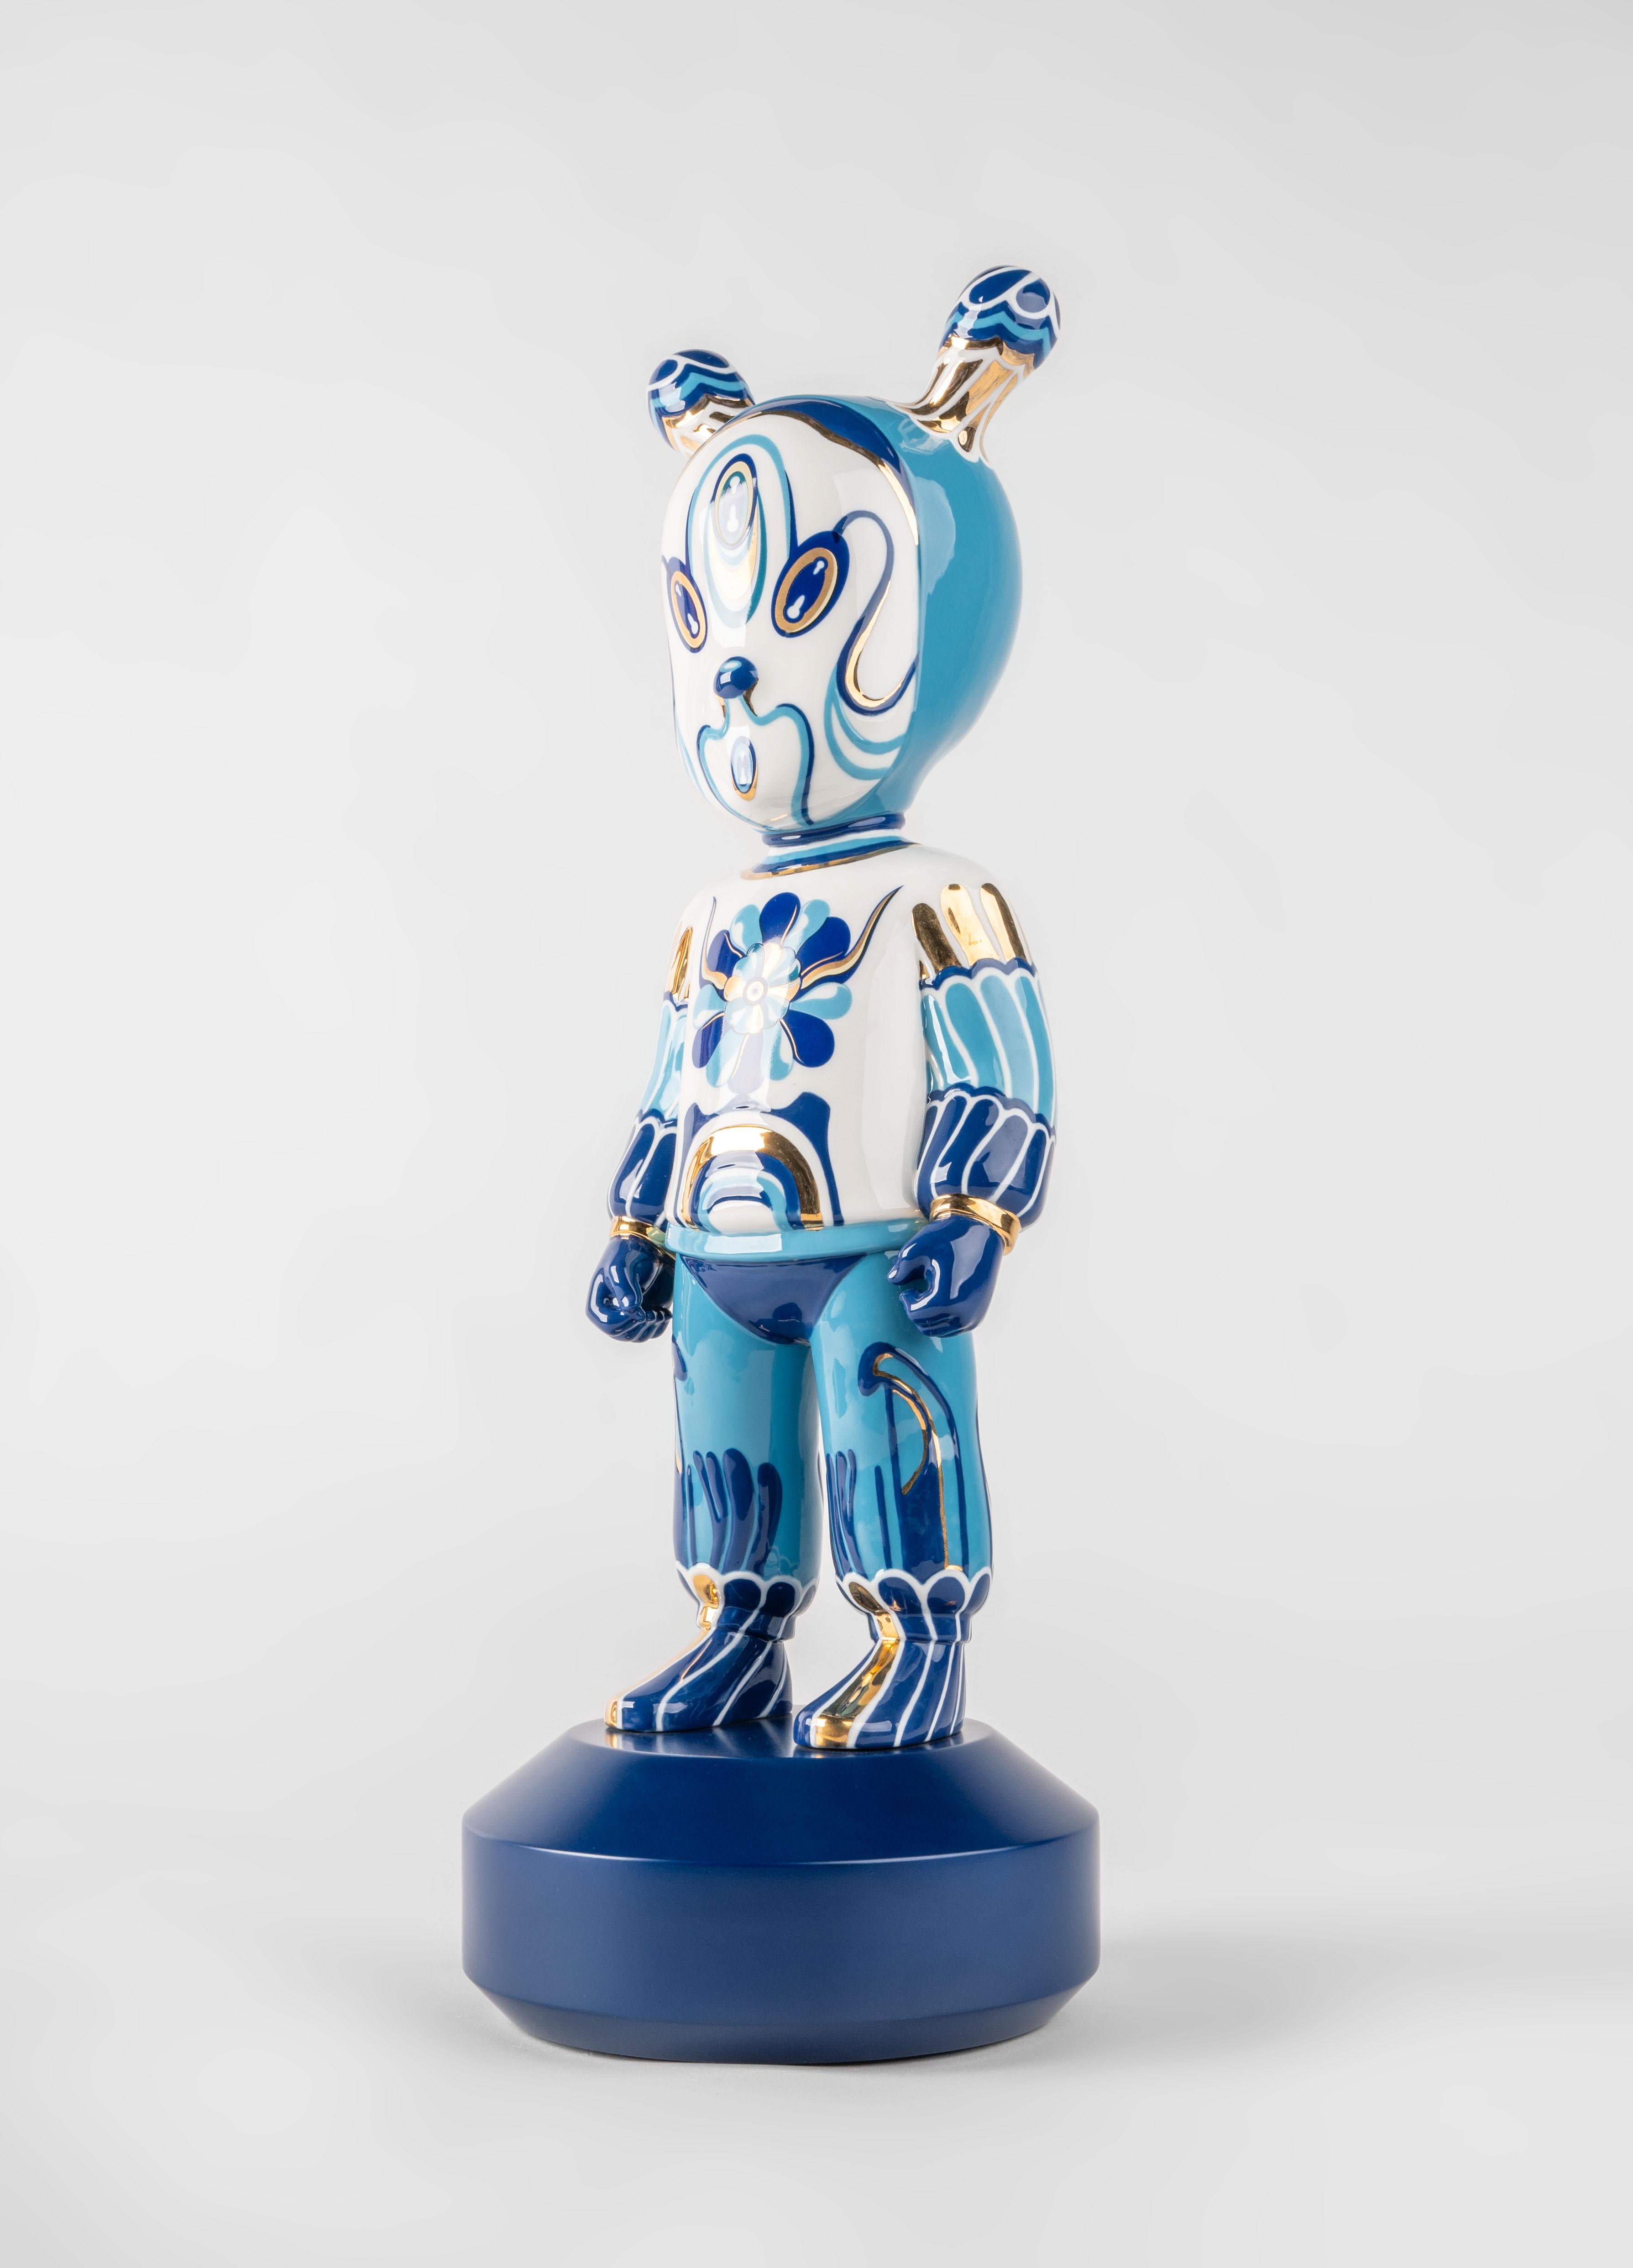 Porcelain sculpture created by the Chinese artist Kzeng Jiang for The Guest collection. This version of The Guest is by Kzeng Jiang, the first Chinese artist to join the creative universe of this iconic character. The work of the Shanghai-based